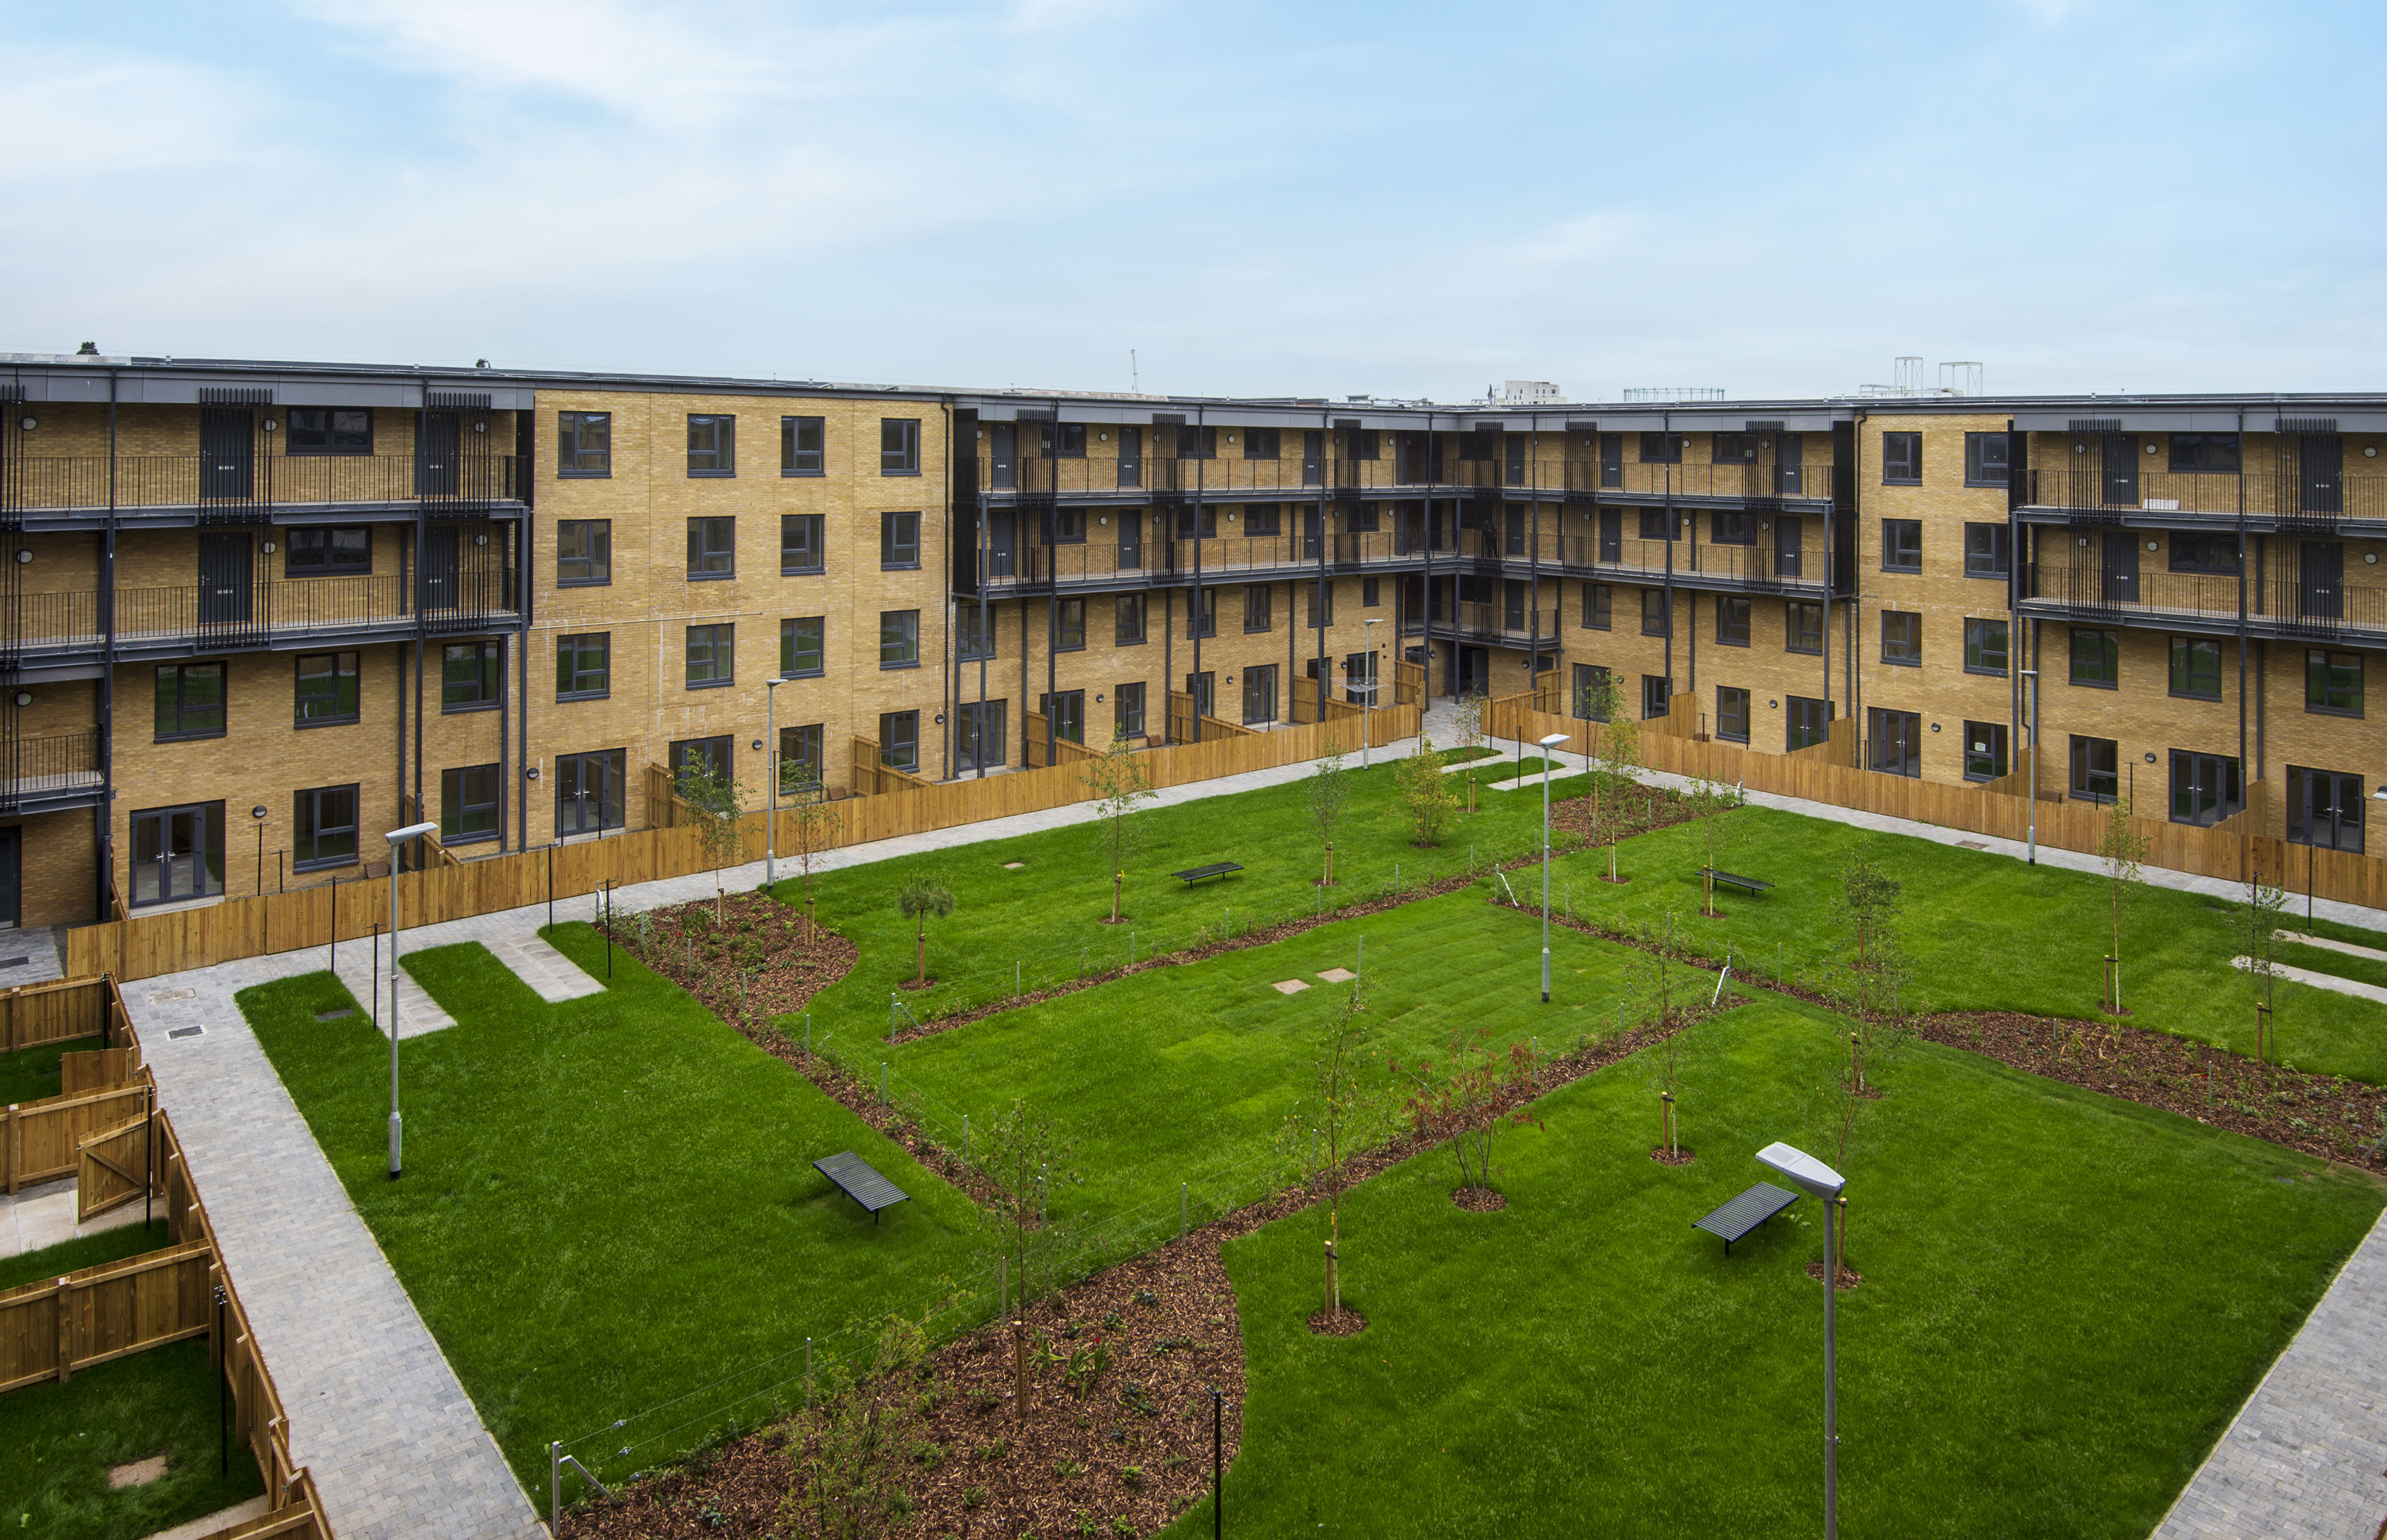 Completion of 104 new affordable homes for Granton celebrated